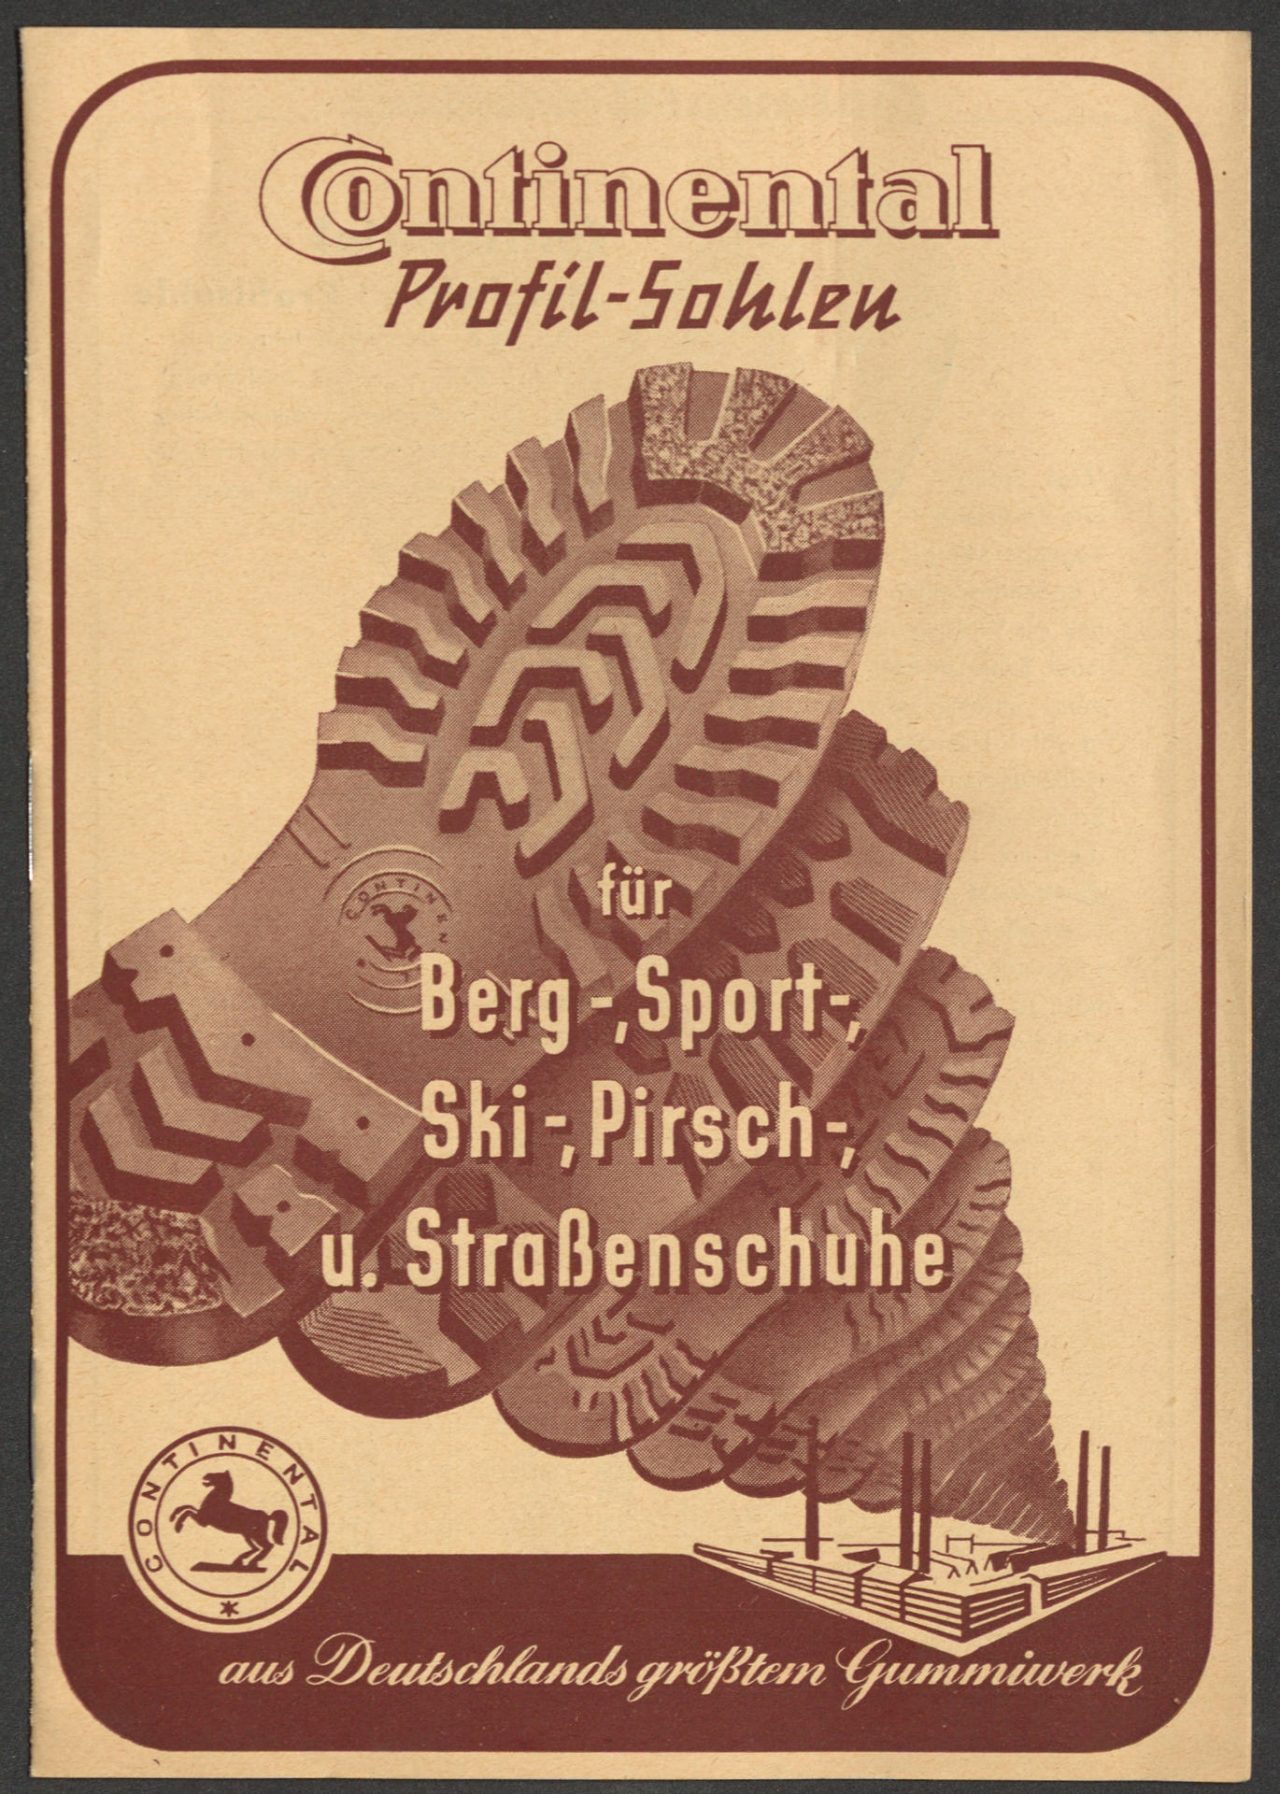 History of rubber shoe soles